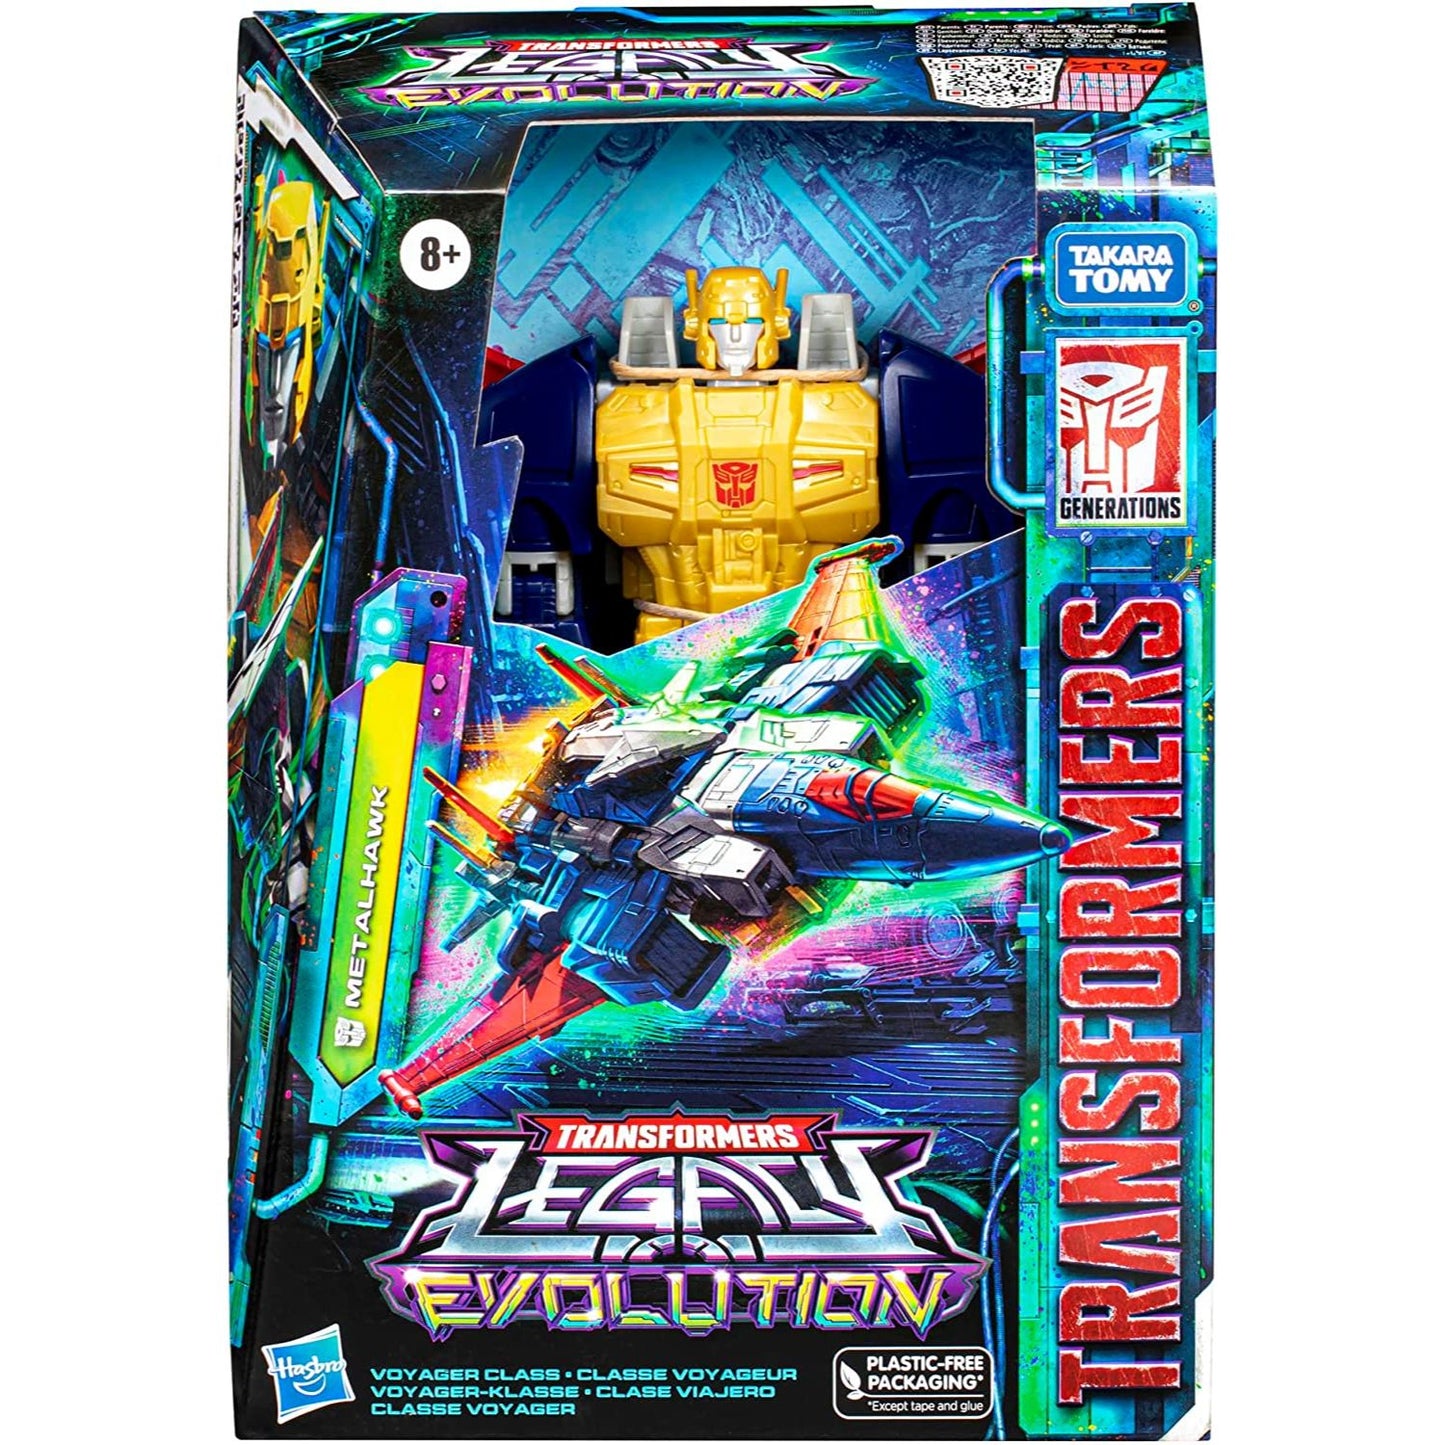 Transformers Generations Legacy Evolution Voyager Metalhawk Action Figure Toy